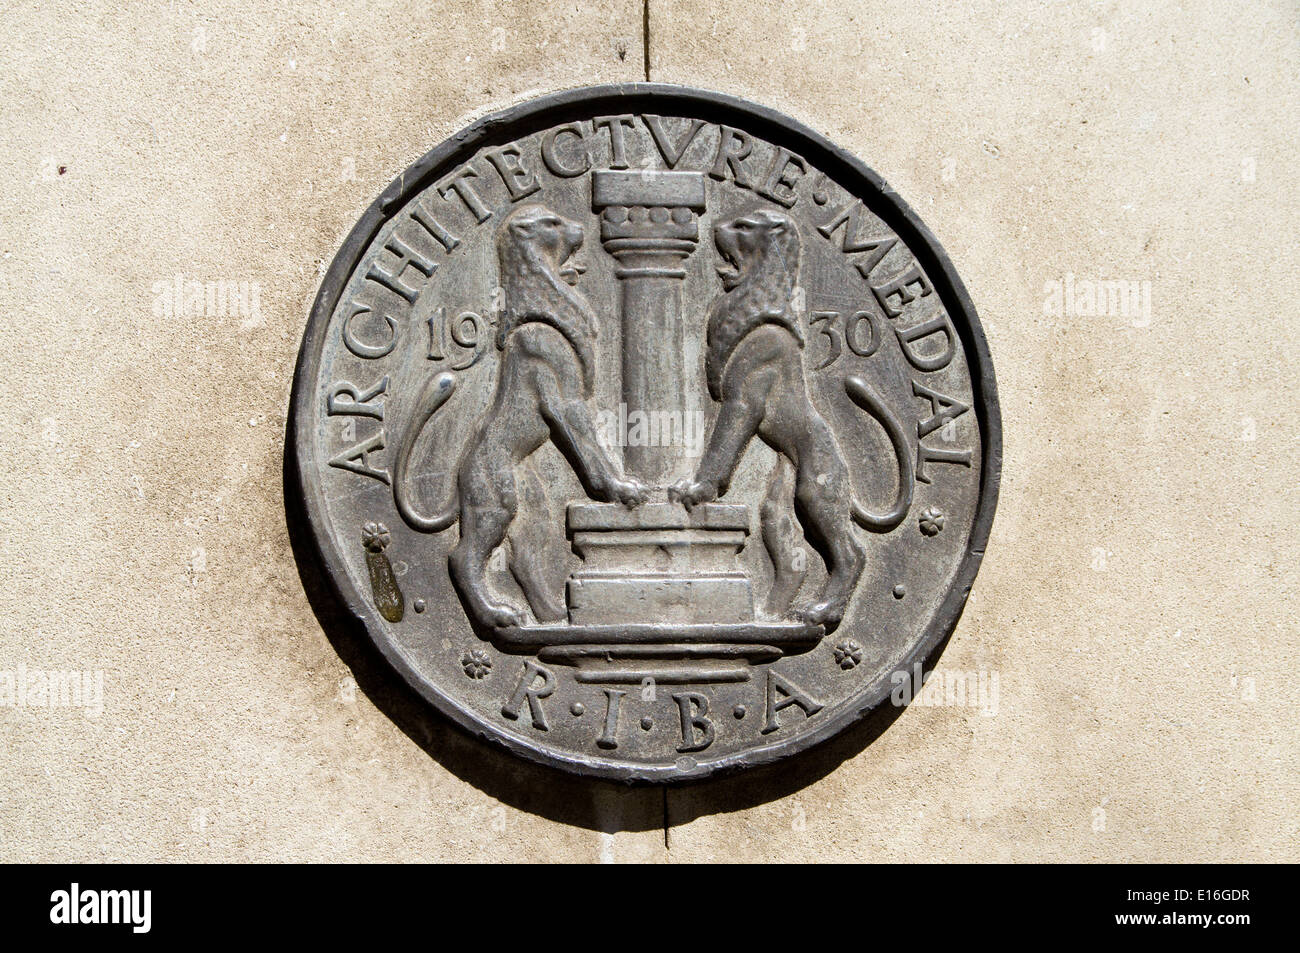 R.I.B.A. Archcitectural Medal, Howells Shop, Cardiff, Wales. Stock Photo